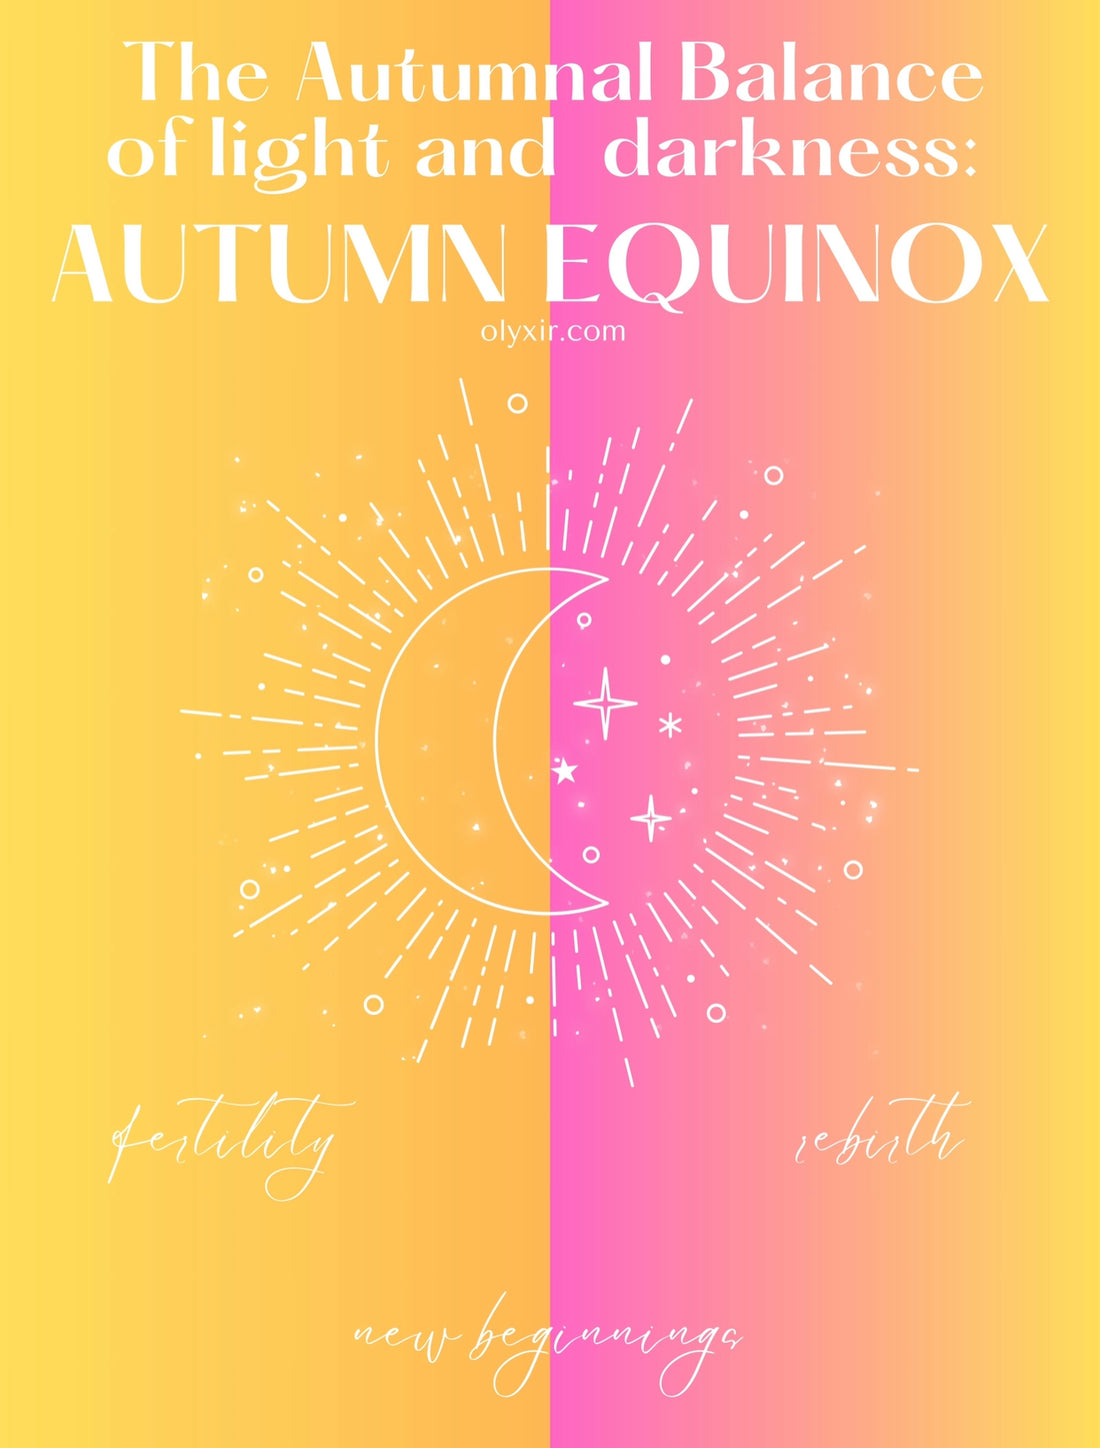 One Of The Best Ways To Enjoy The Autumn Equinox